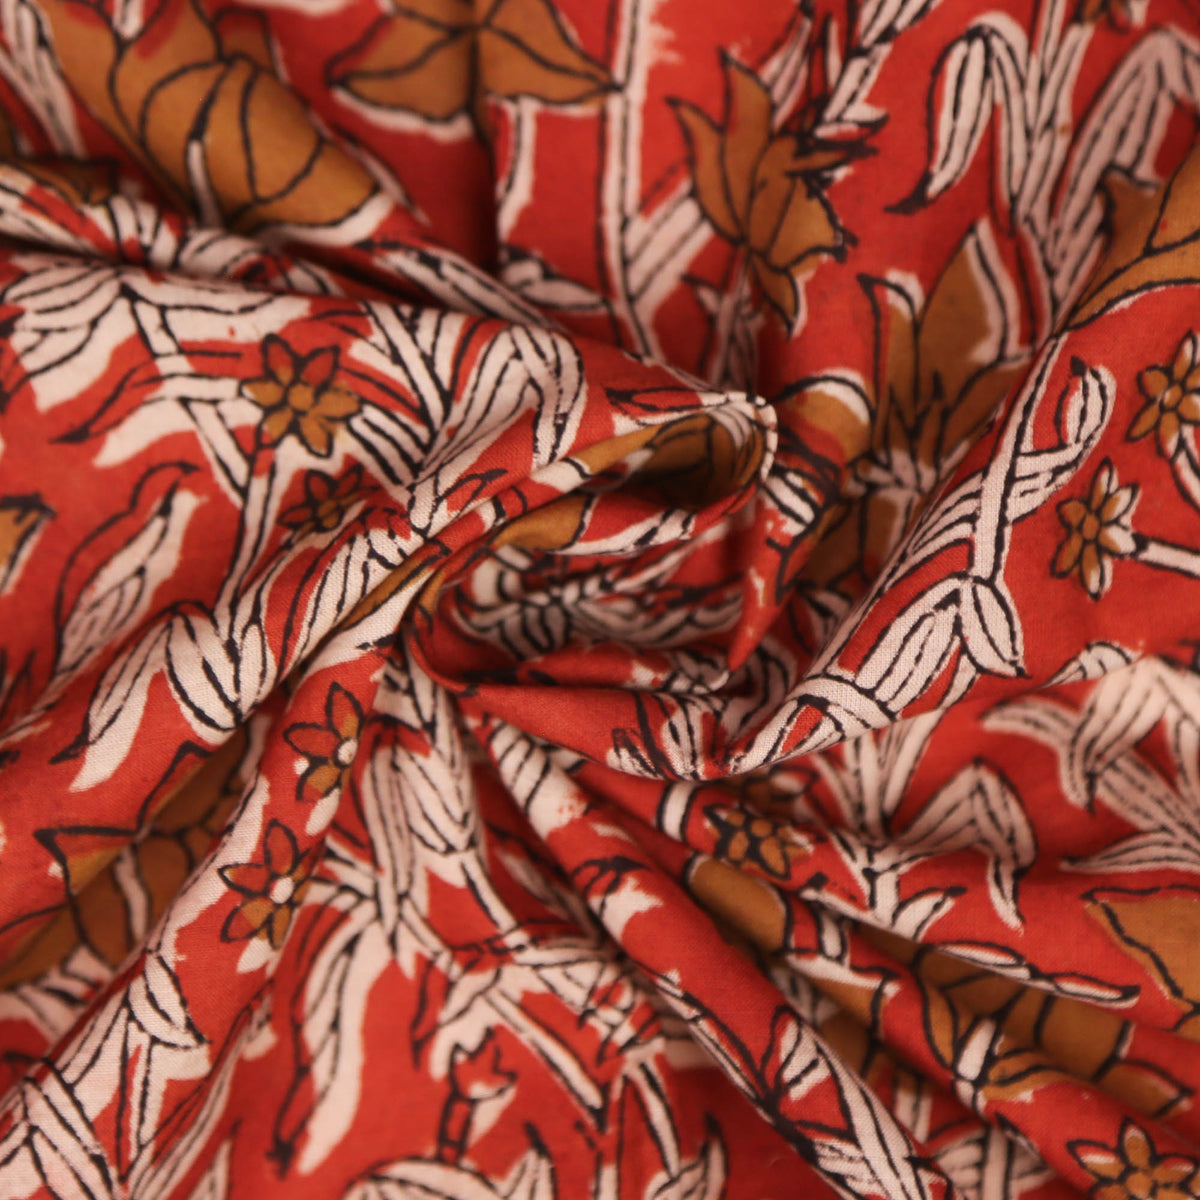 Block Print Fabric - Brown Flowers On Red( Design 495)